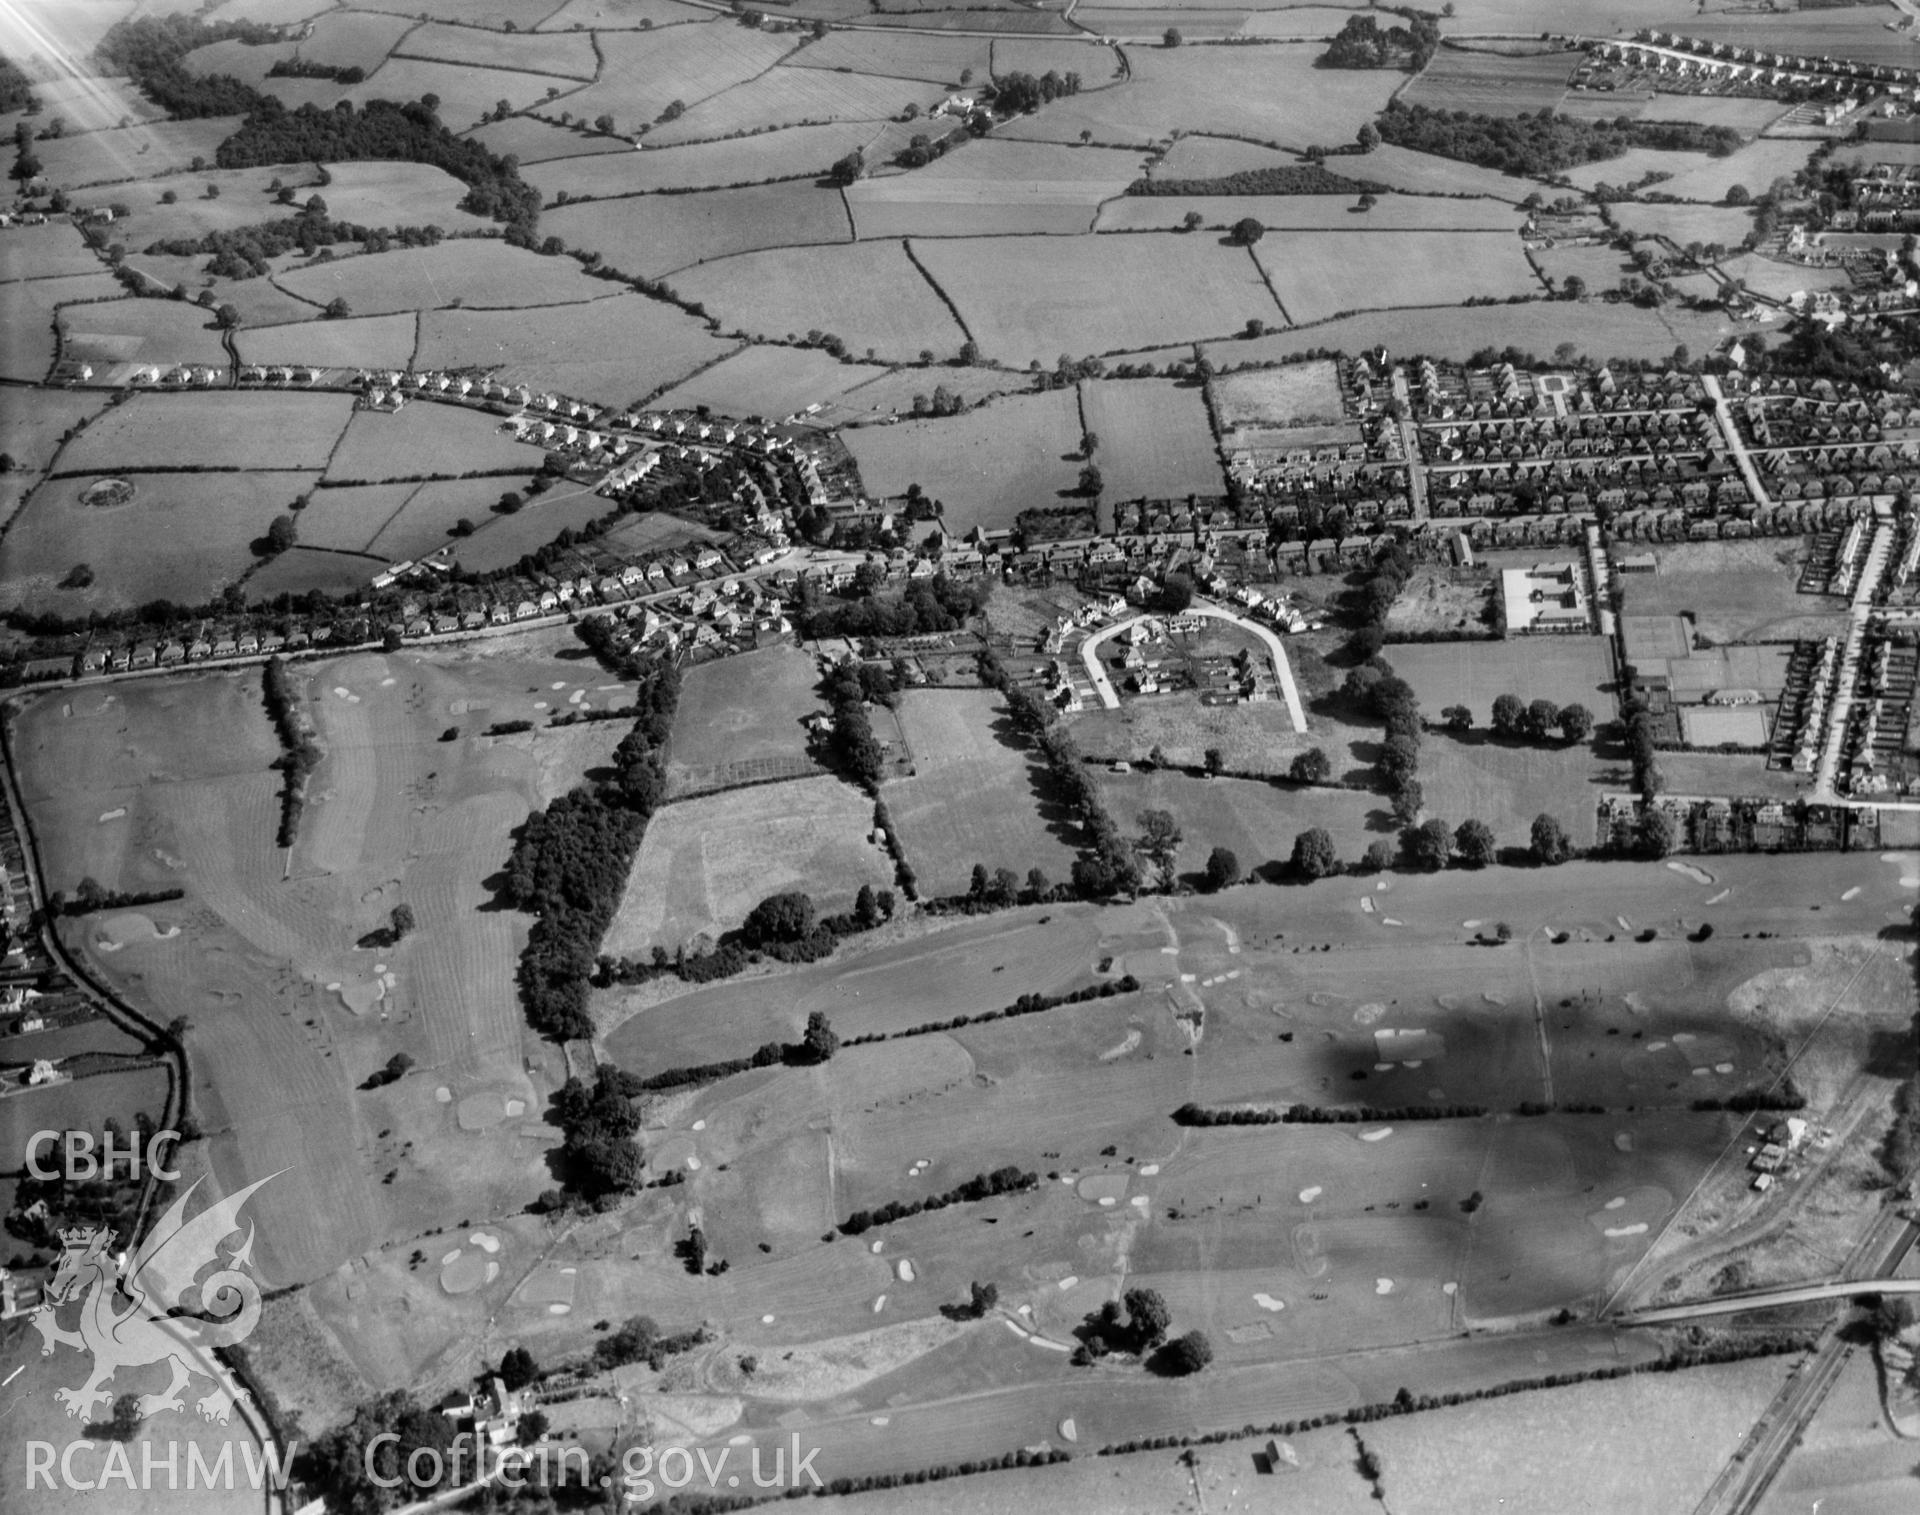 View of Whitchurch golf club, oblique aerial view. 5?x4? black and white glass plate negative.